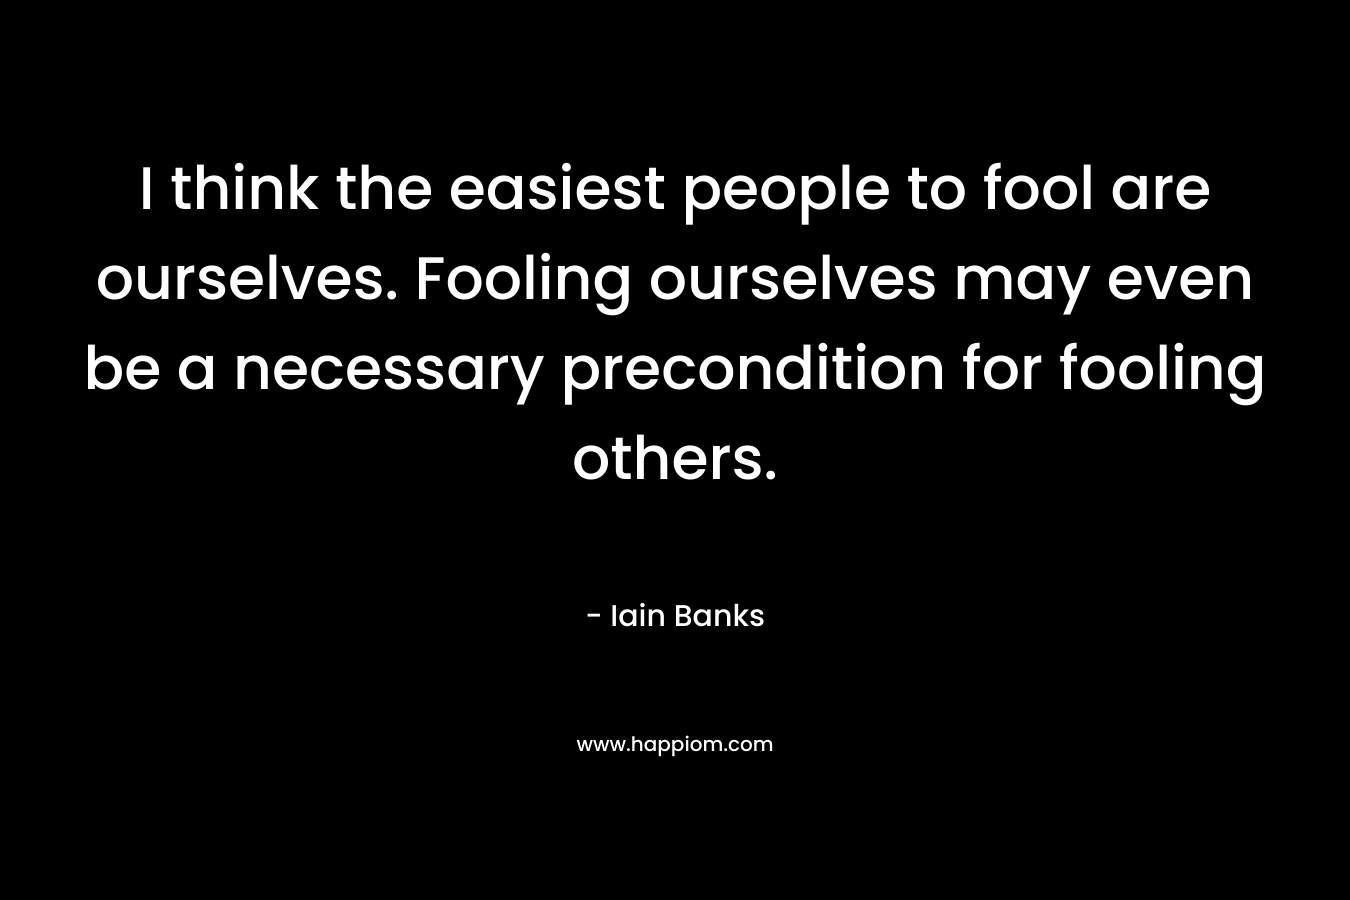 I think the easiest people to fool are ourselves. Fooling ourselves may even be a necessary precondition for fooling others.